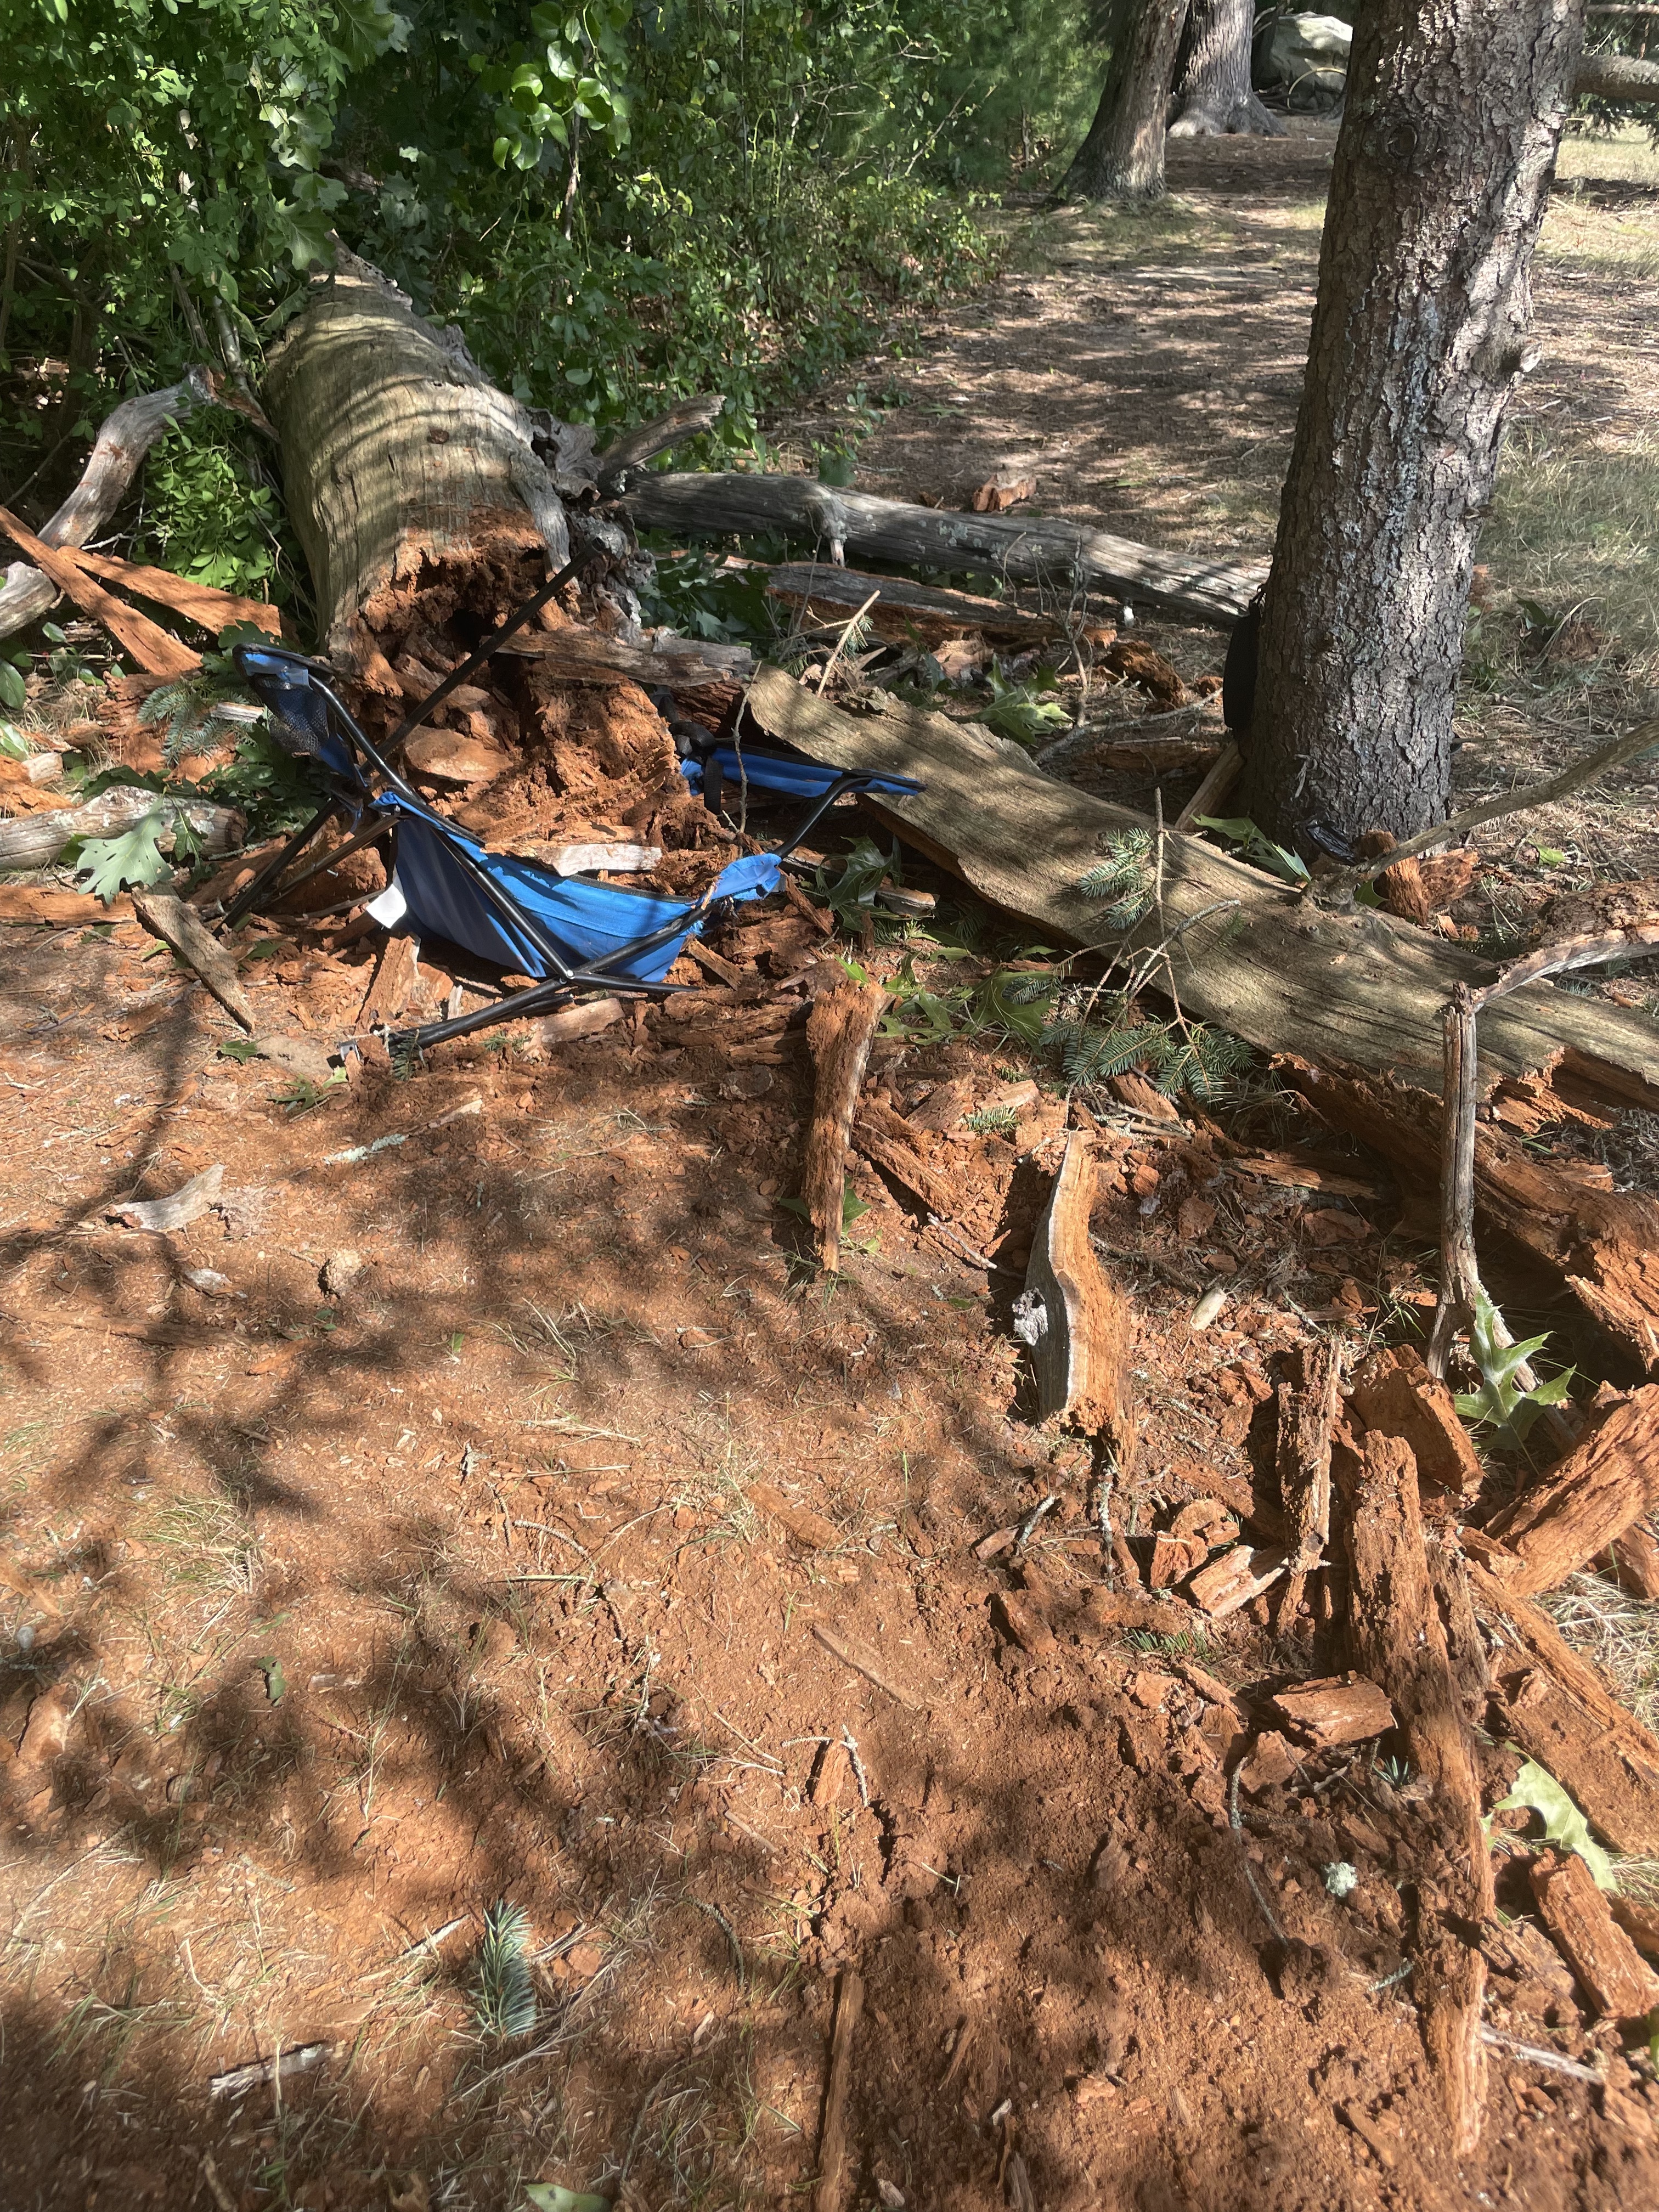 A tree fallen over a blue camping chair. The chair is crushed, the tree's width encompasses the width of the chair. In front of the chair are pulverized remnants of tree